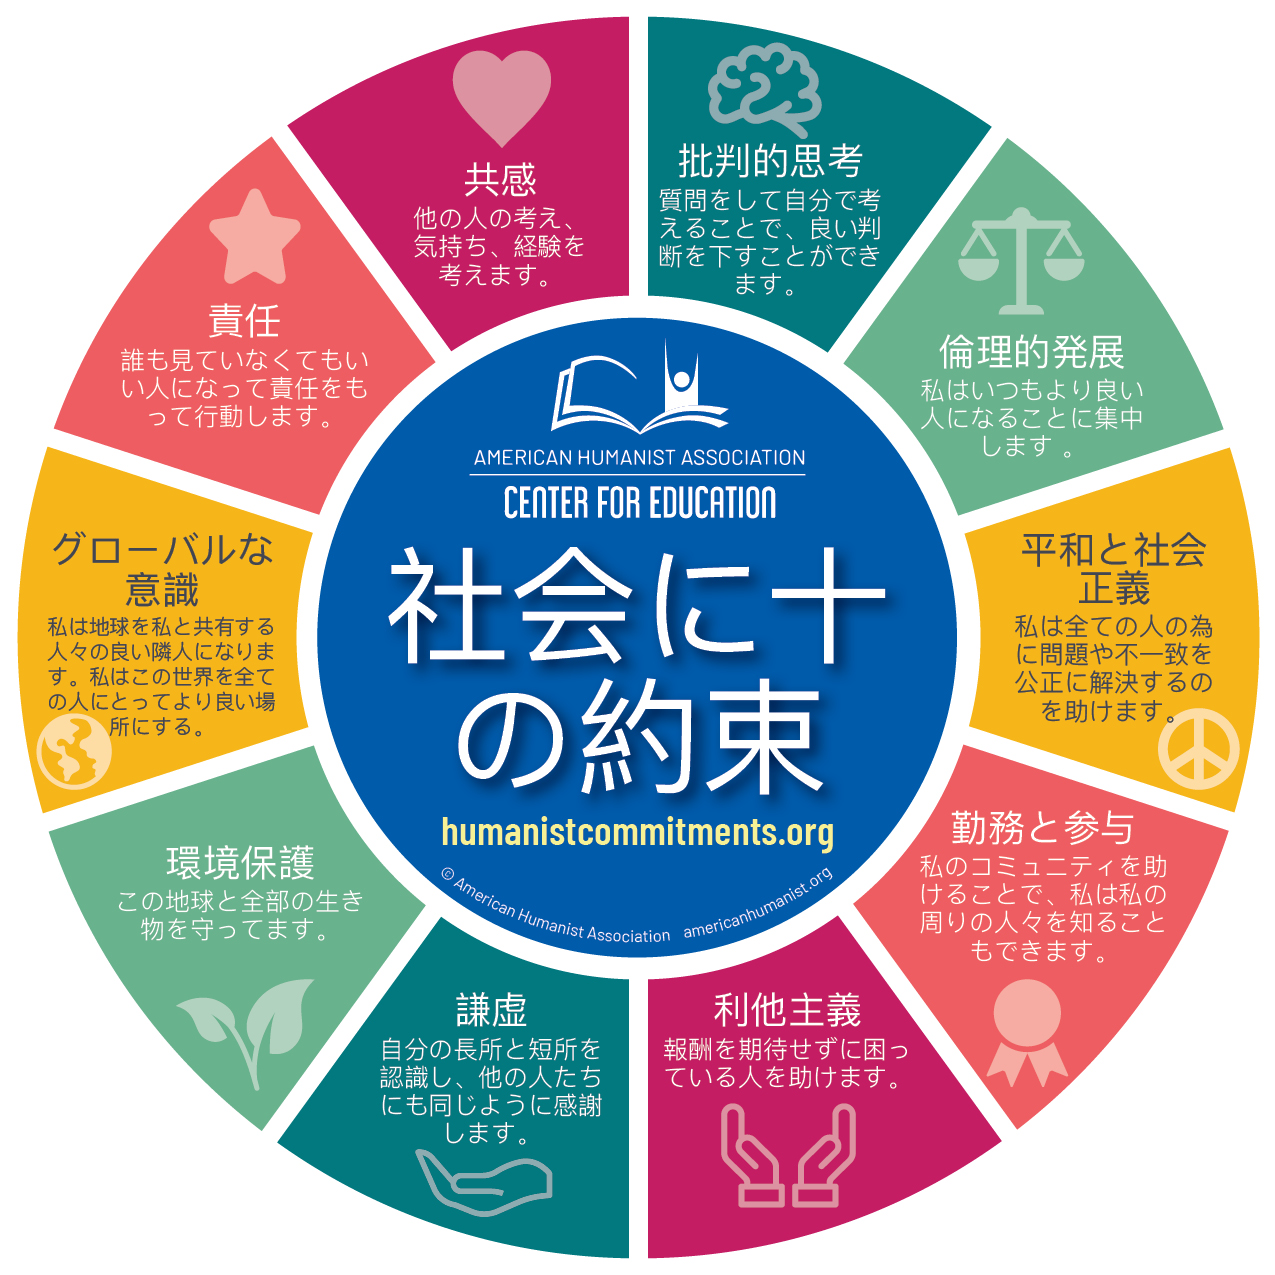 10 Humanist commitments in Japanese